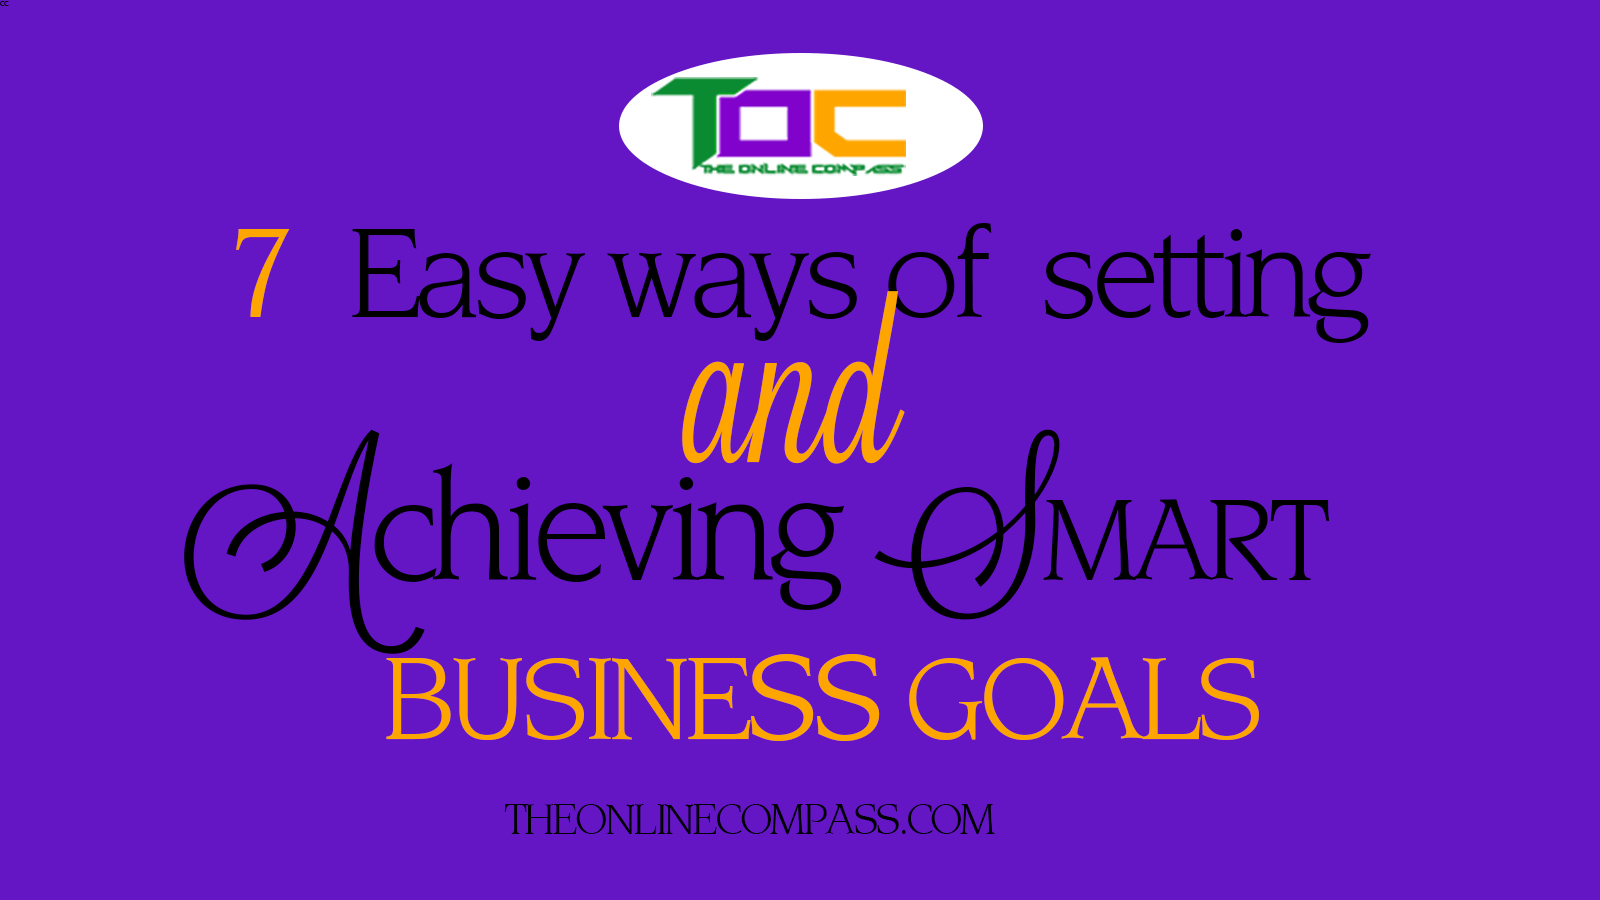 7 easy ways of setting and achieving smart business goals